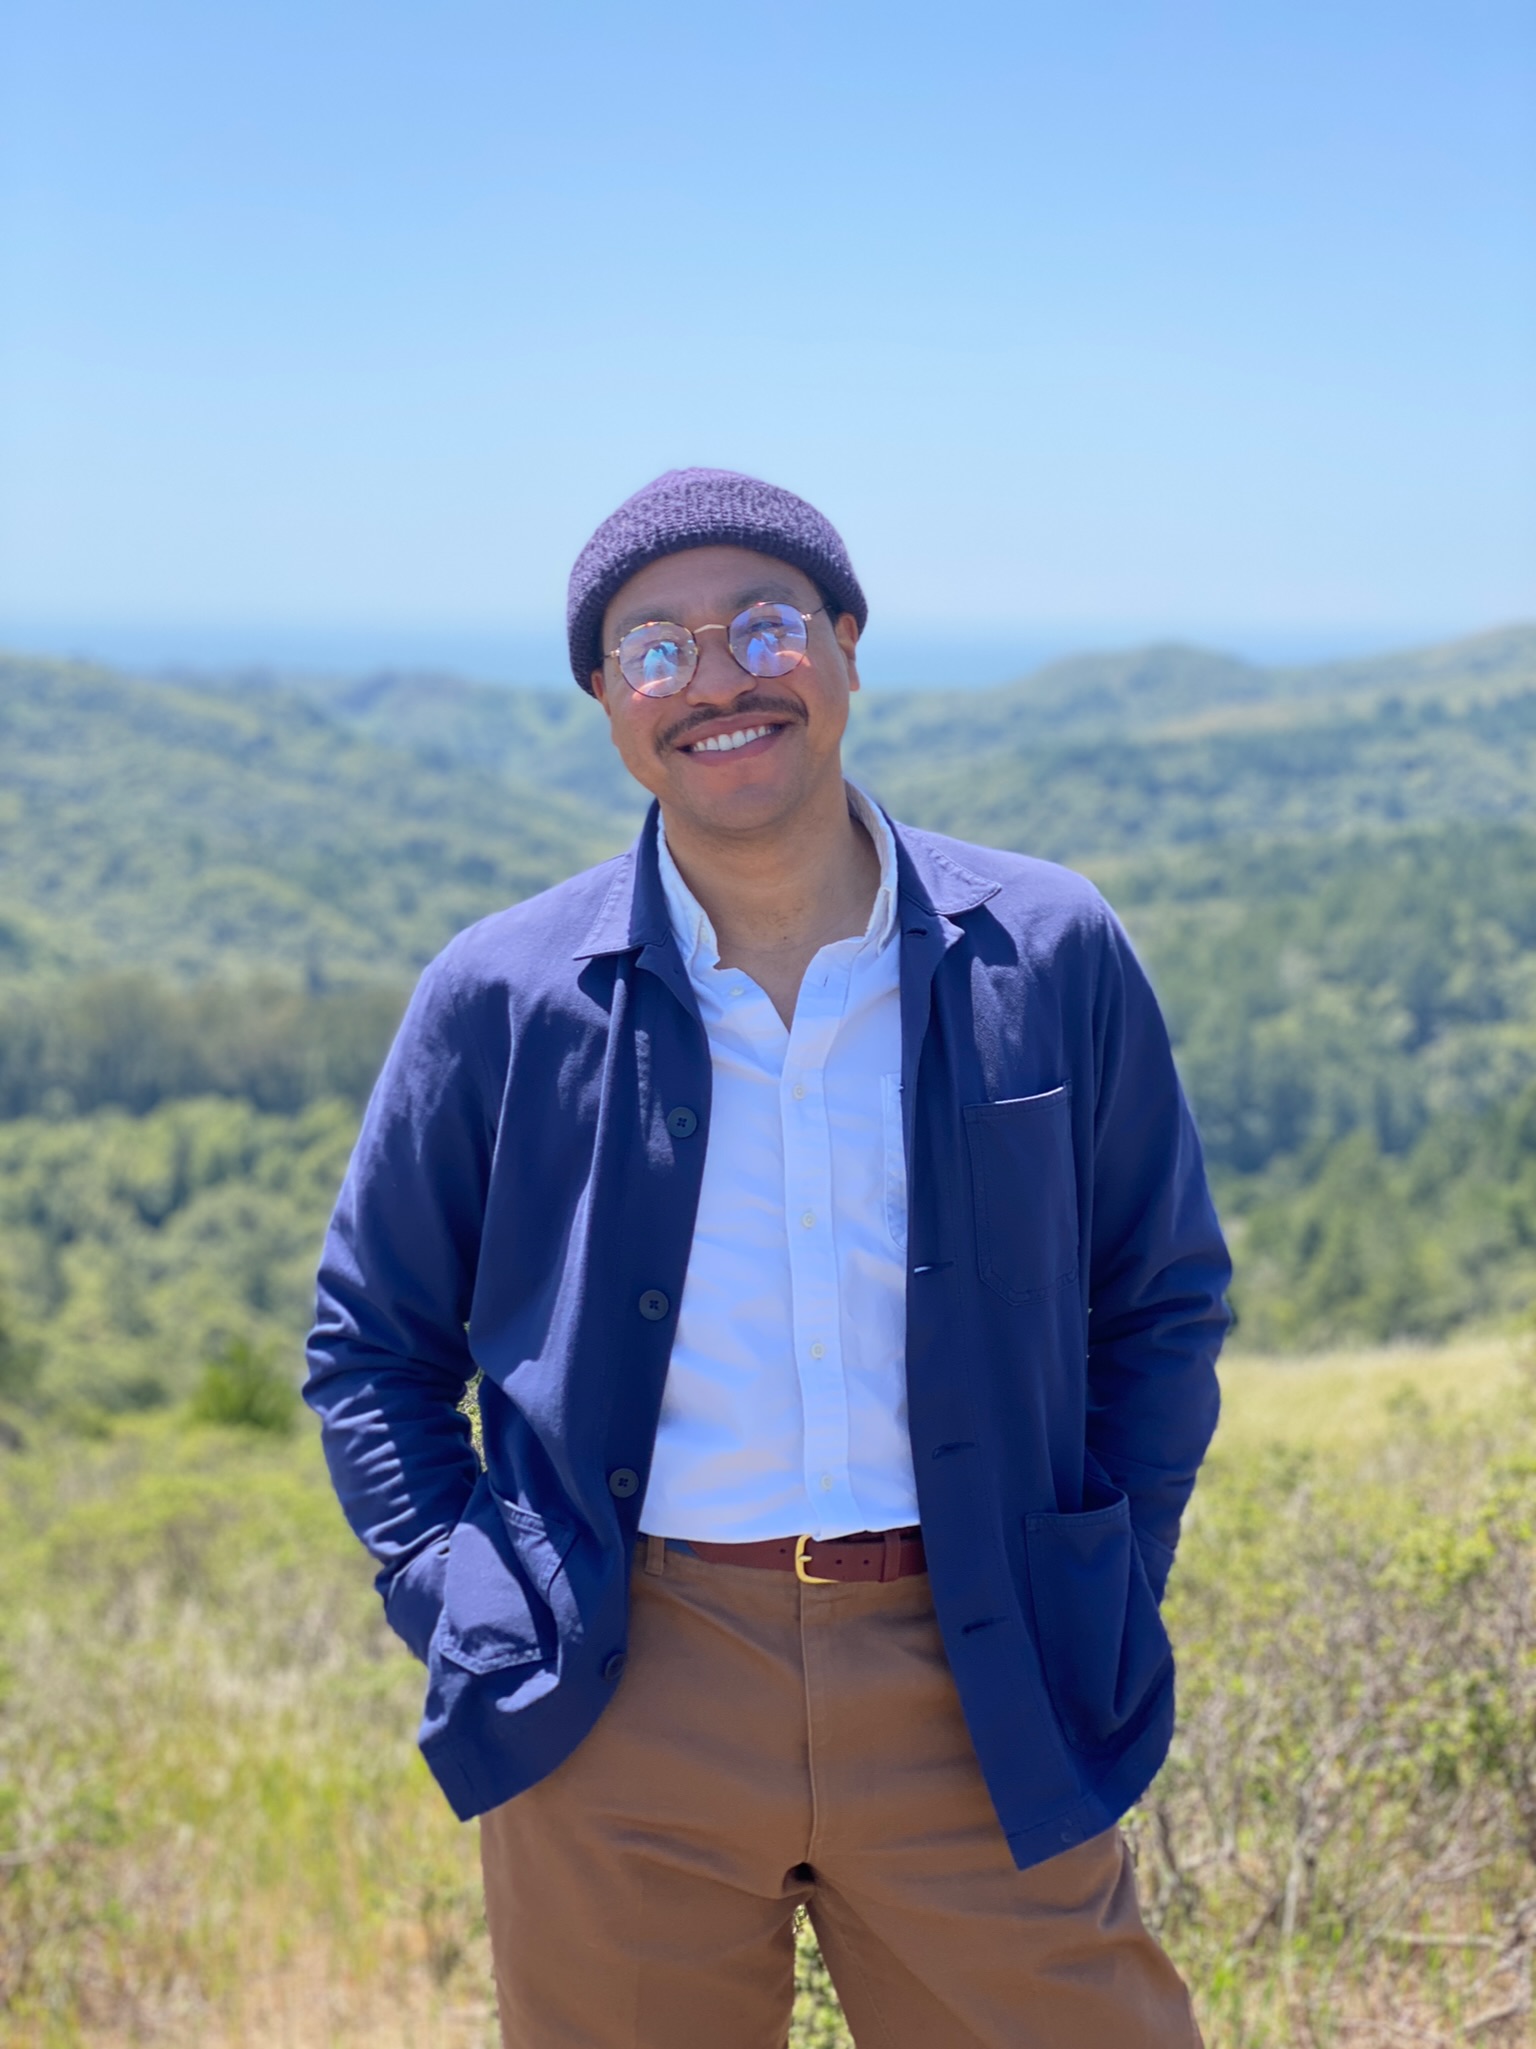 Elijah stands smiling in a beanie, glasses, white button down, khaki pants and a jacket in front of a green mountain background